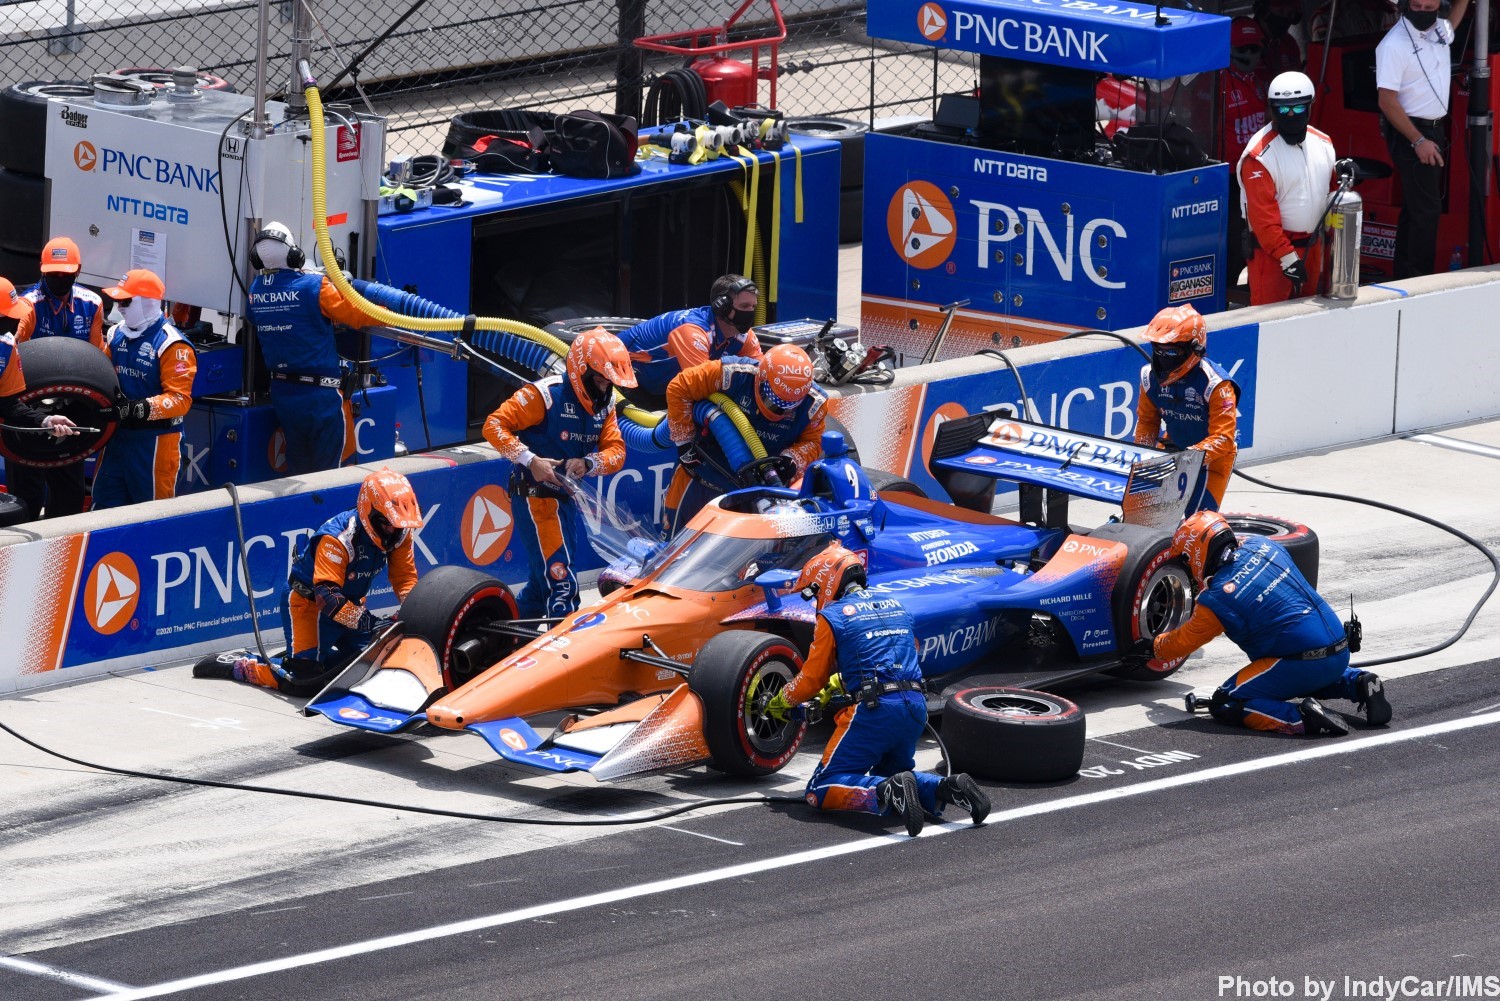 Scott Dixon was mired toward the back until luck fell his way